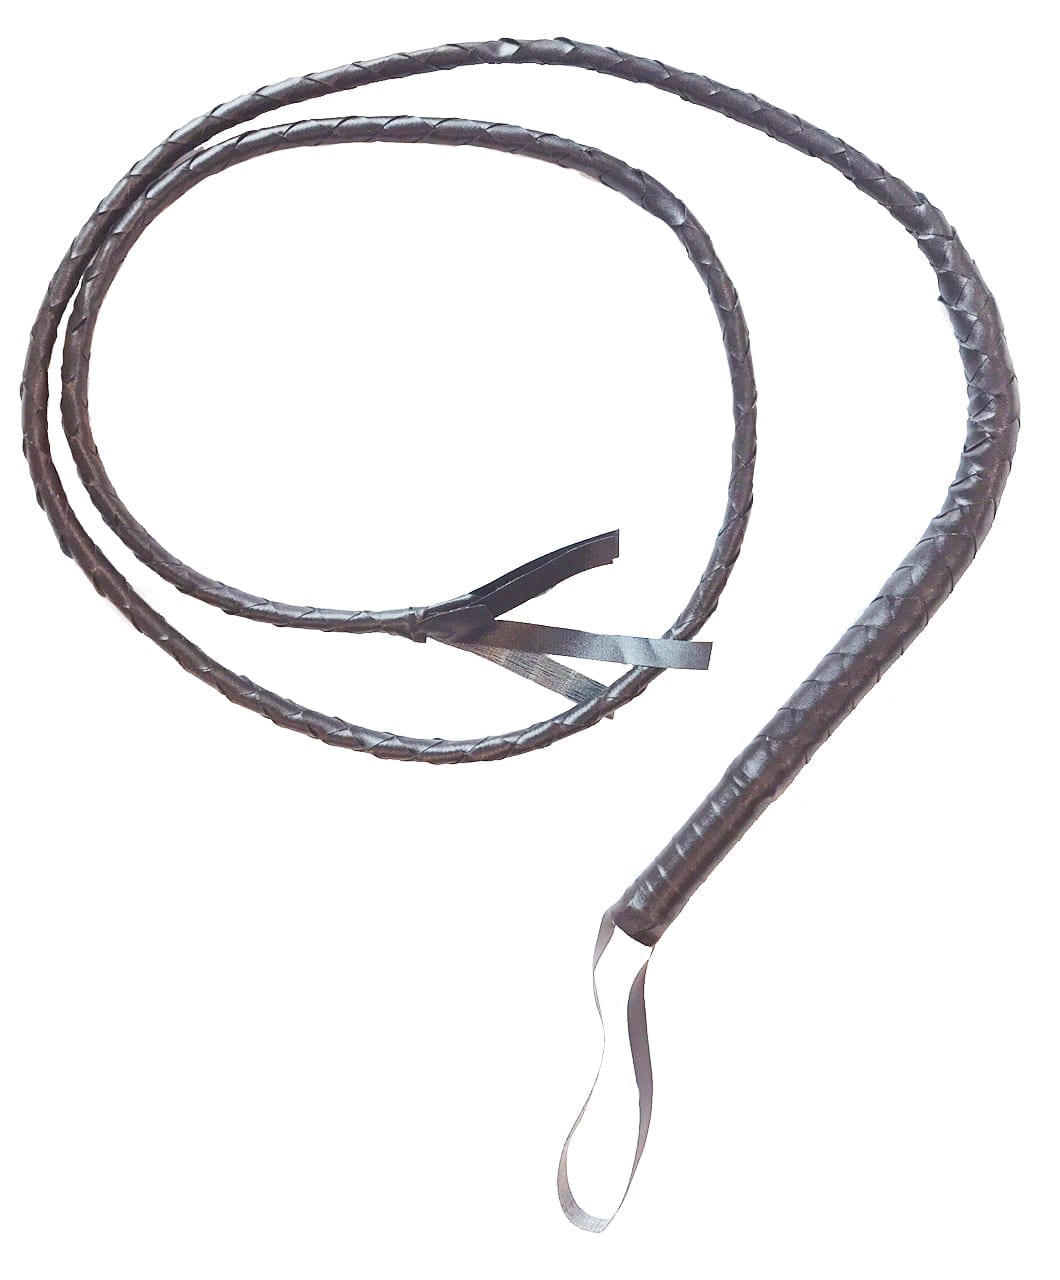 Featured image for “6 ft Whip – Brown (Indiana Jones Style)”